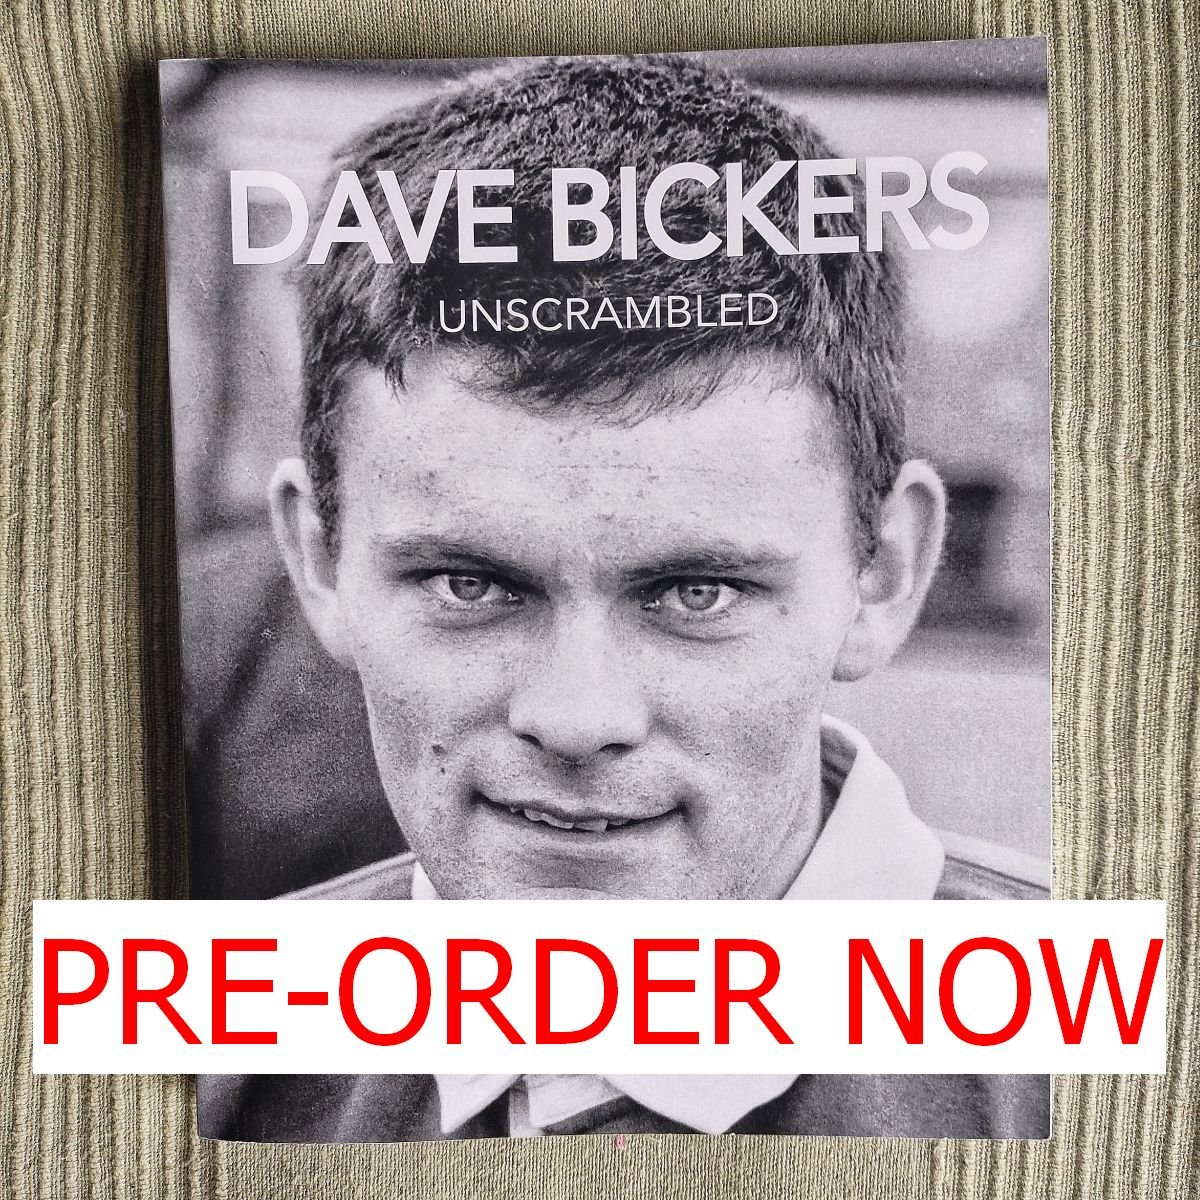 Pre-order your copy of Dave Bickers Unscrambled  now!